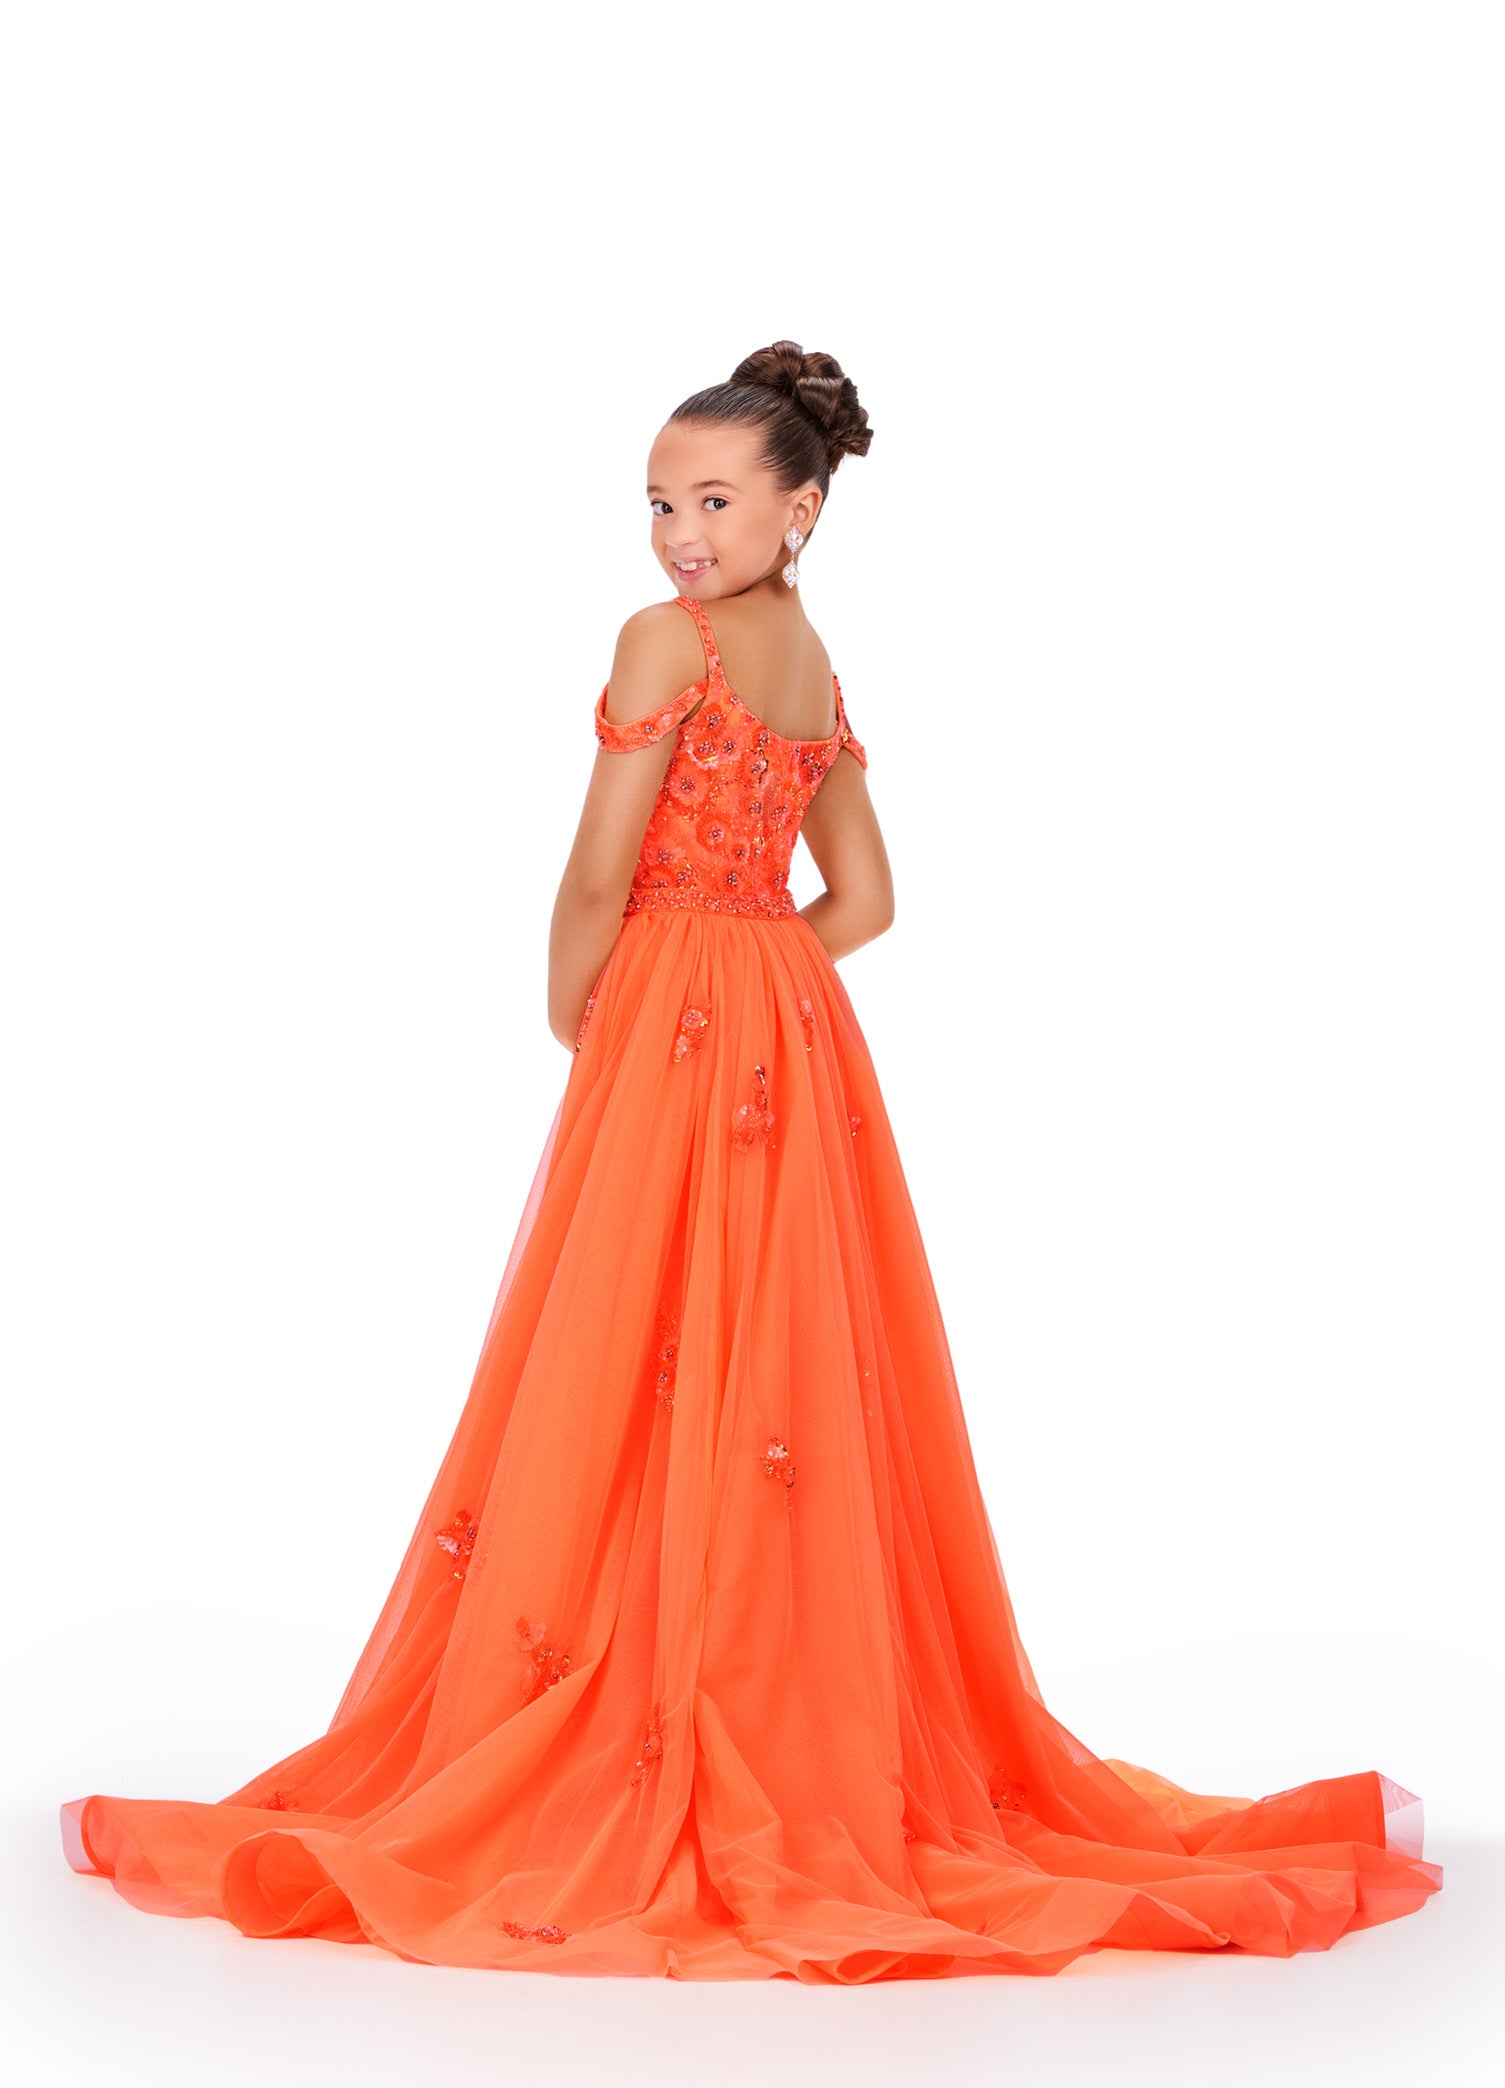 Expertly crafted for little girls who deserve to sparkle, the Ashley Lauren 8239 dress will make her shine on stage. The fitted silhouette flatters any figure while the beaded details and sequin overlay add a touch of glamour. Perfect for pageants and formal events. Bring the drama in this beaded column gown with shoulder draping straps. The removeable tulle overskirt is embellished with scattered beaded accents.